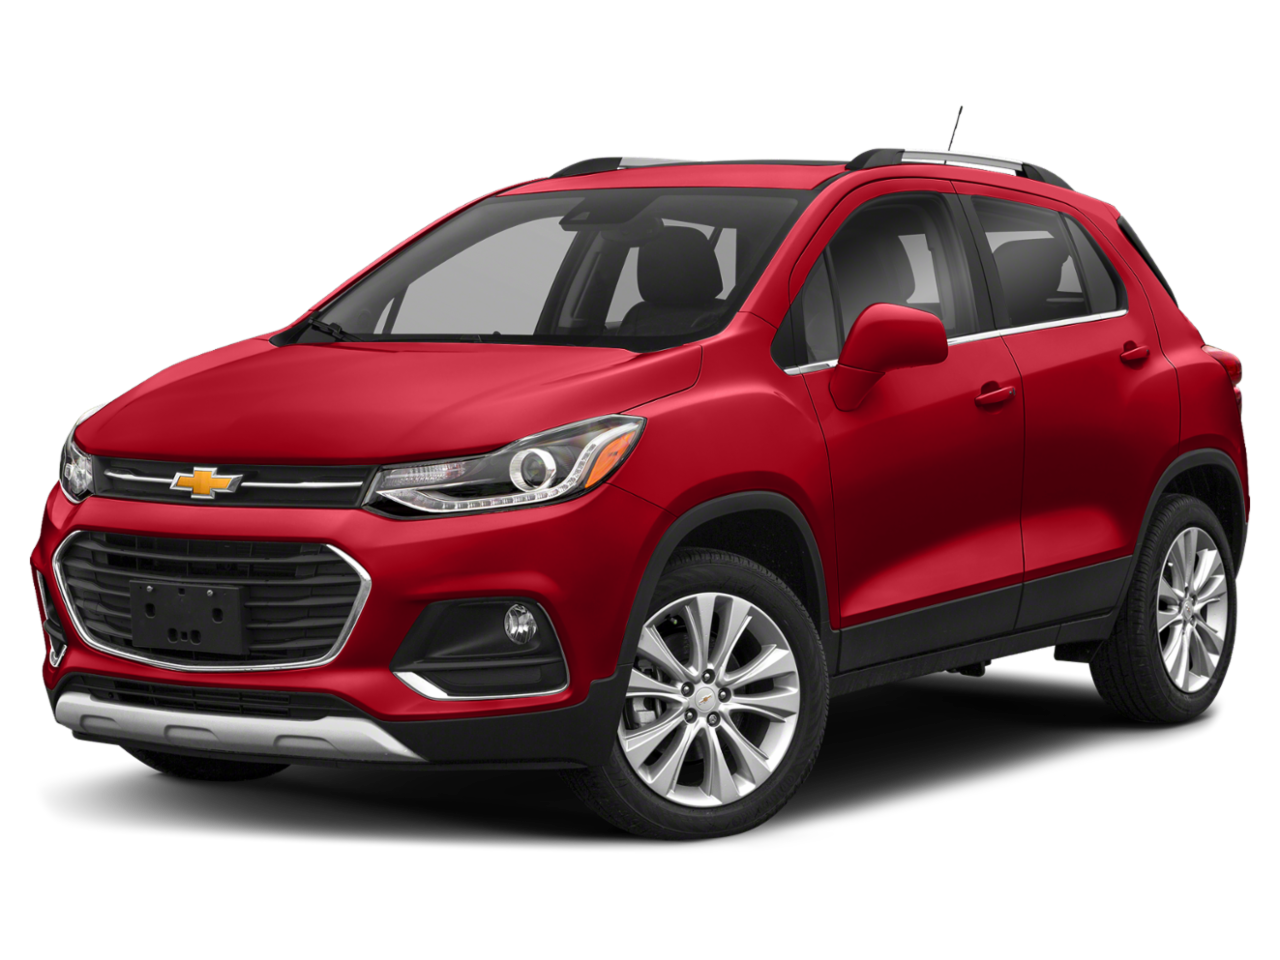 Drive the New Chevrolet Trax in Avondale